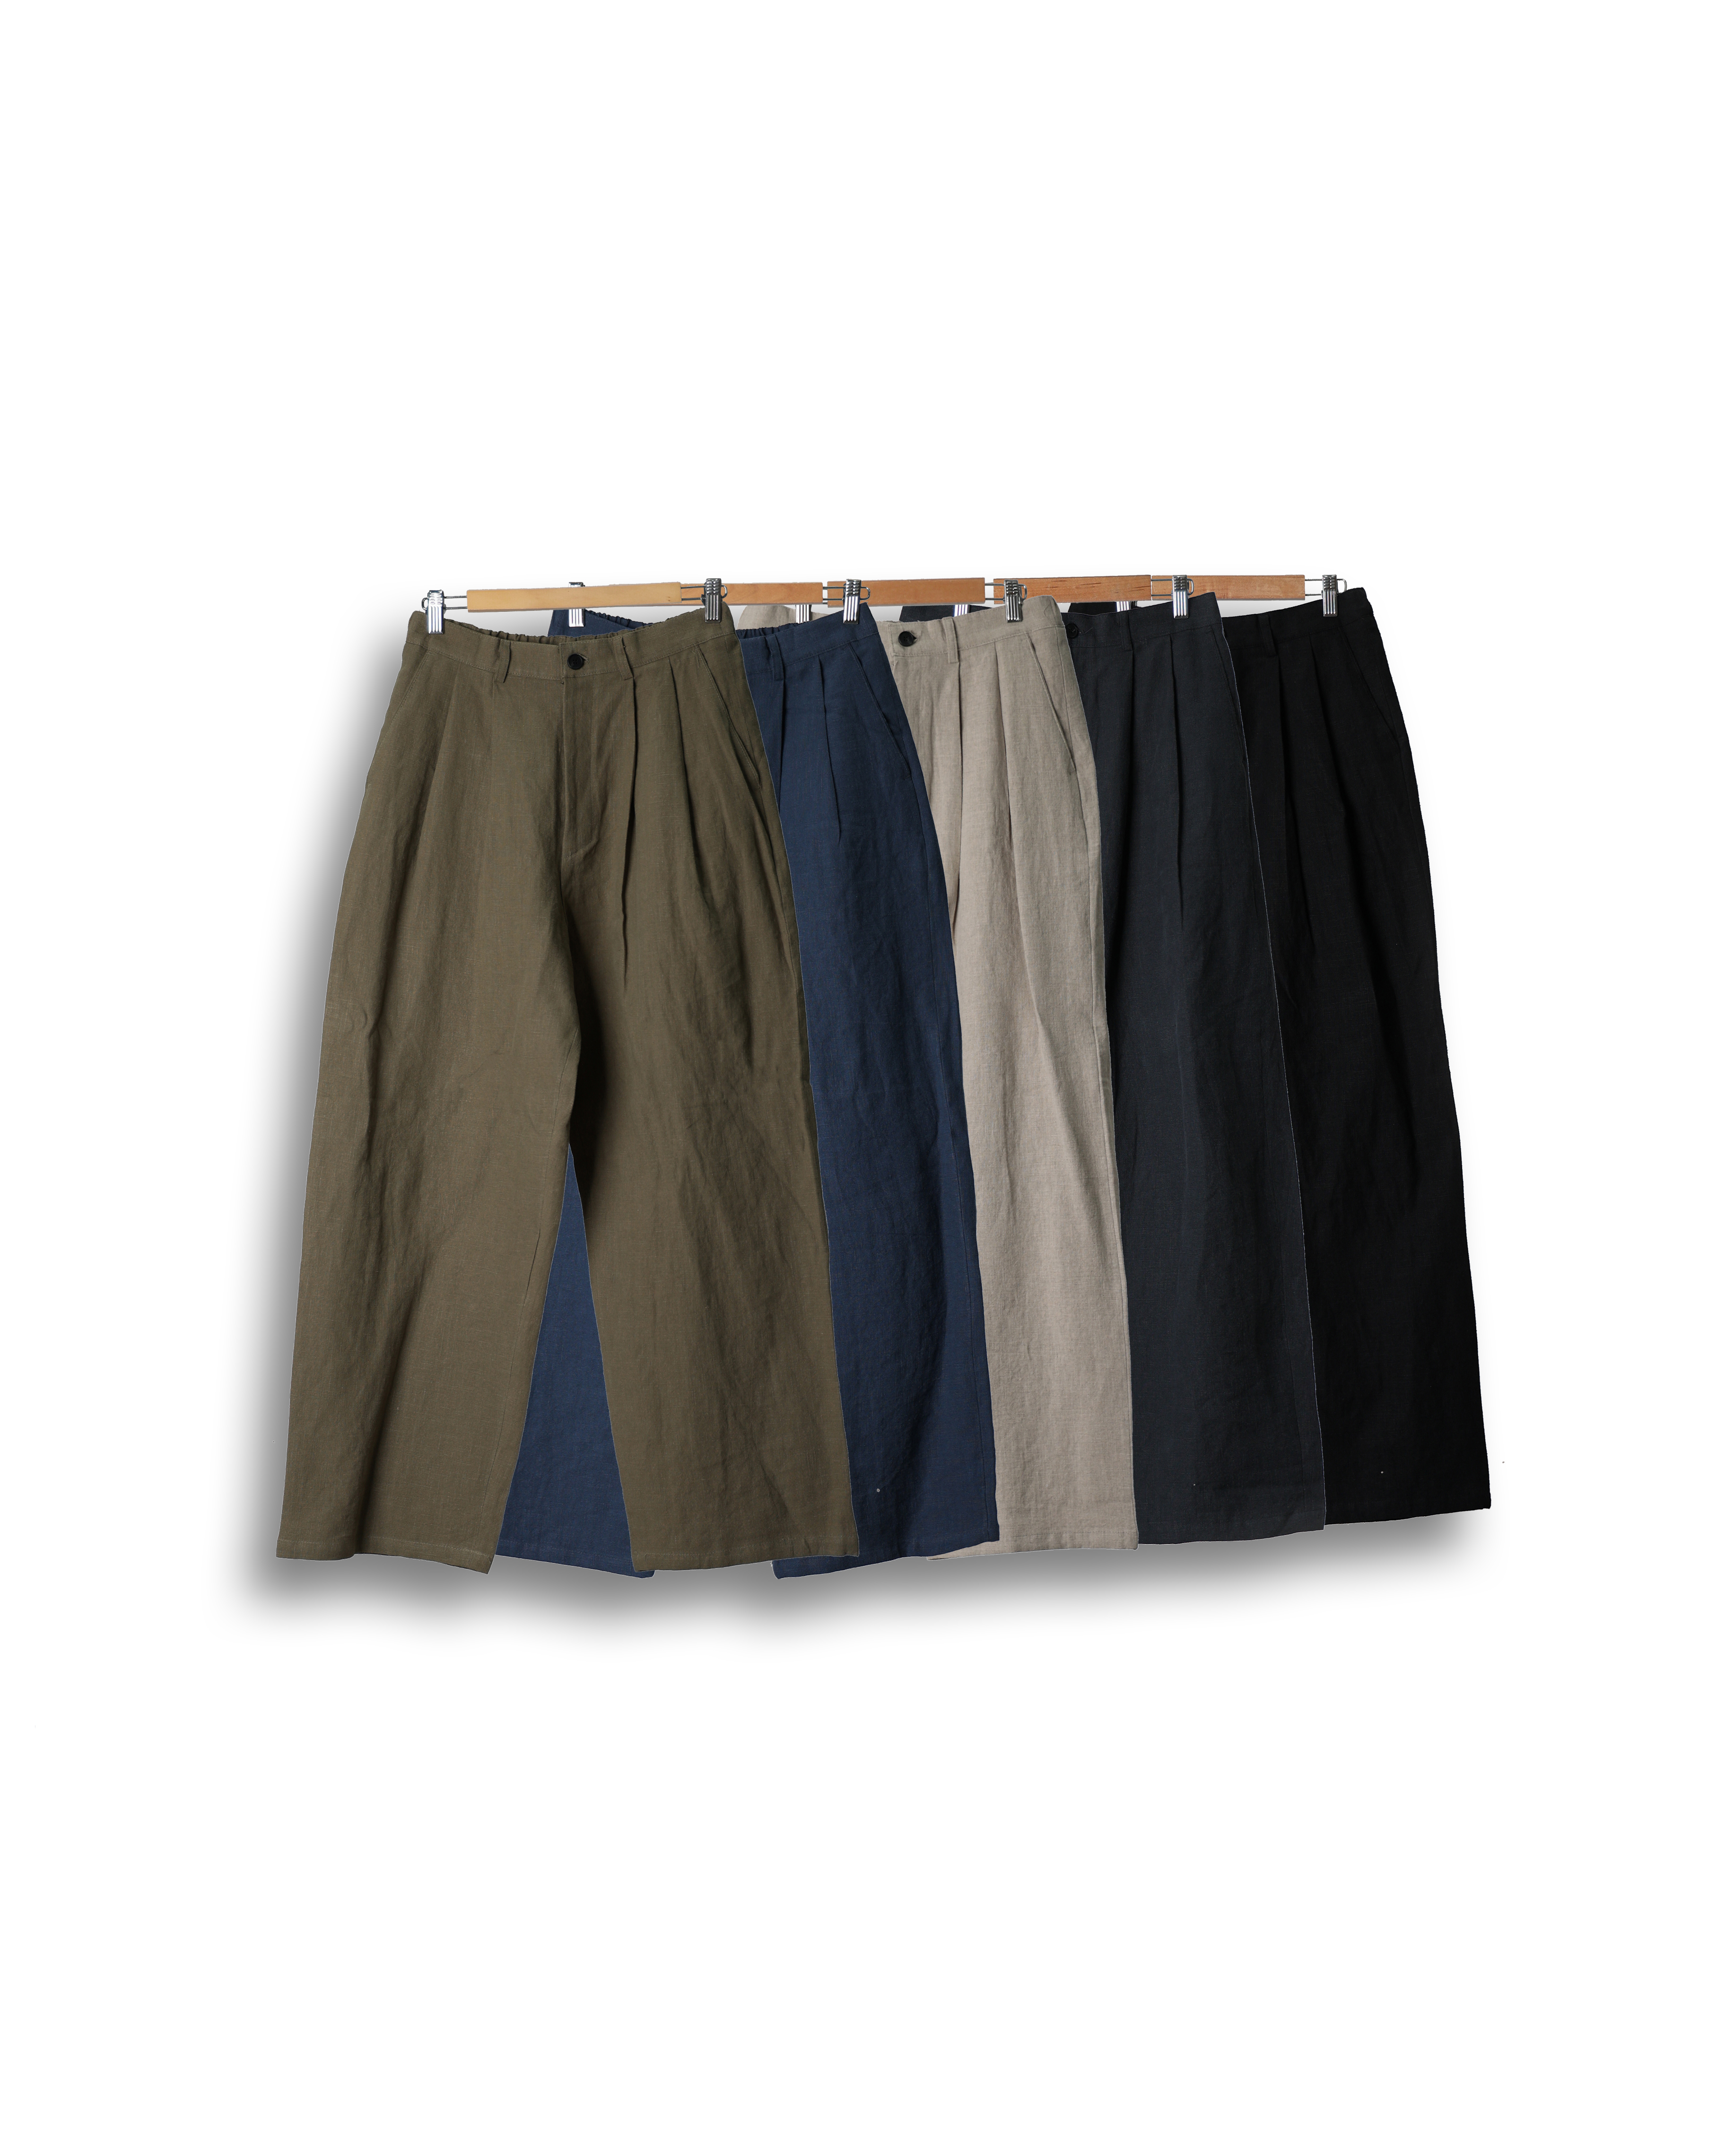 NOMD Two Tuck Pleats Linen Wide Pants (Black/Charcoal/Navy/Olive/Ivory)